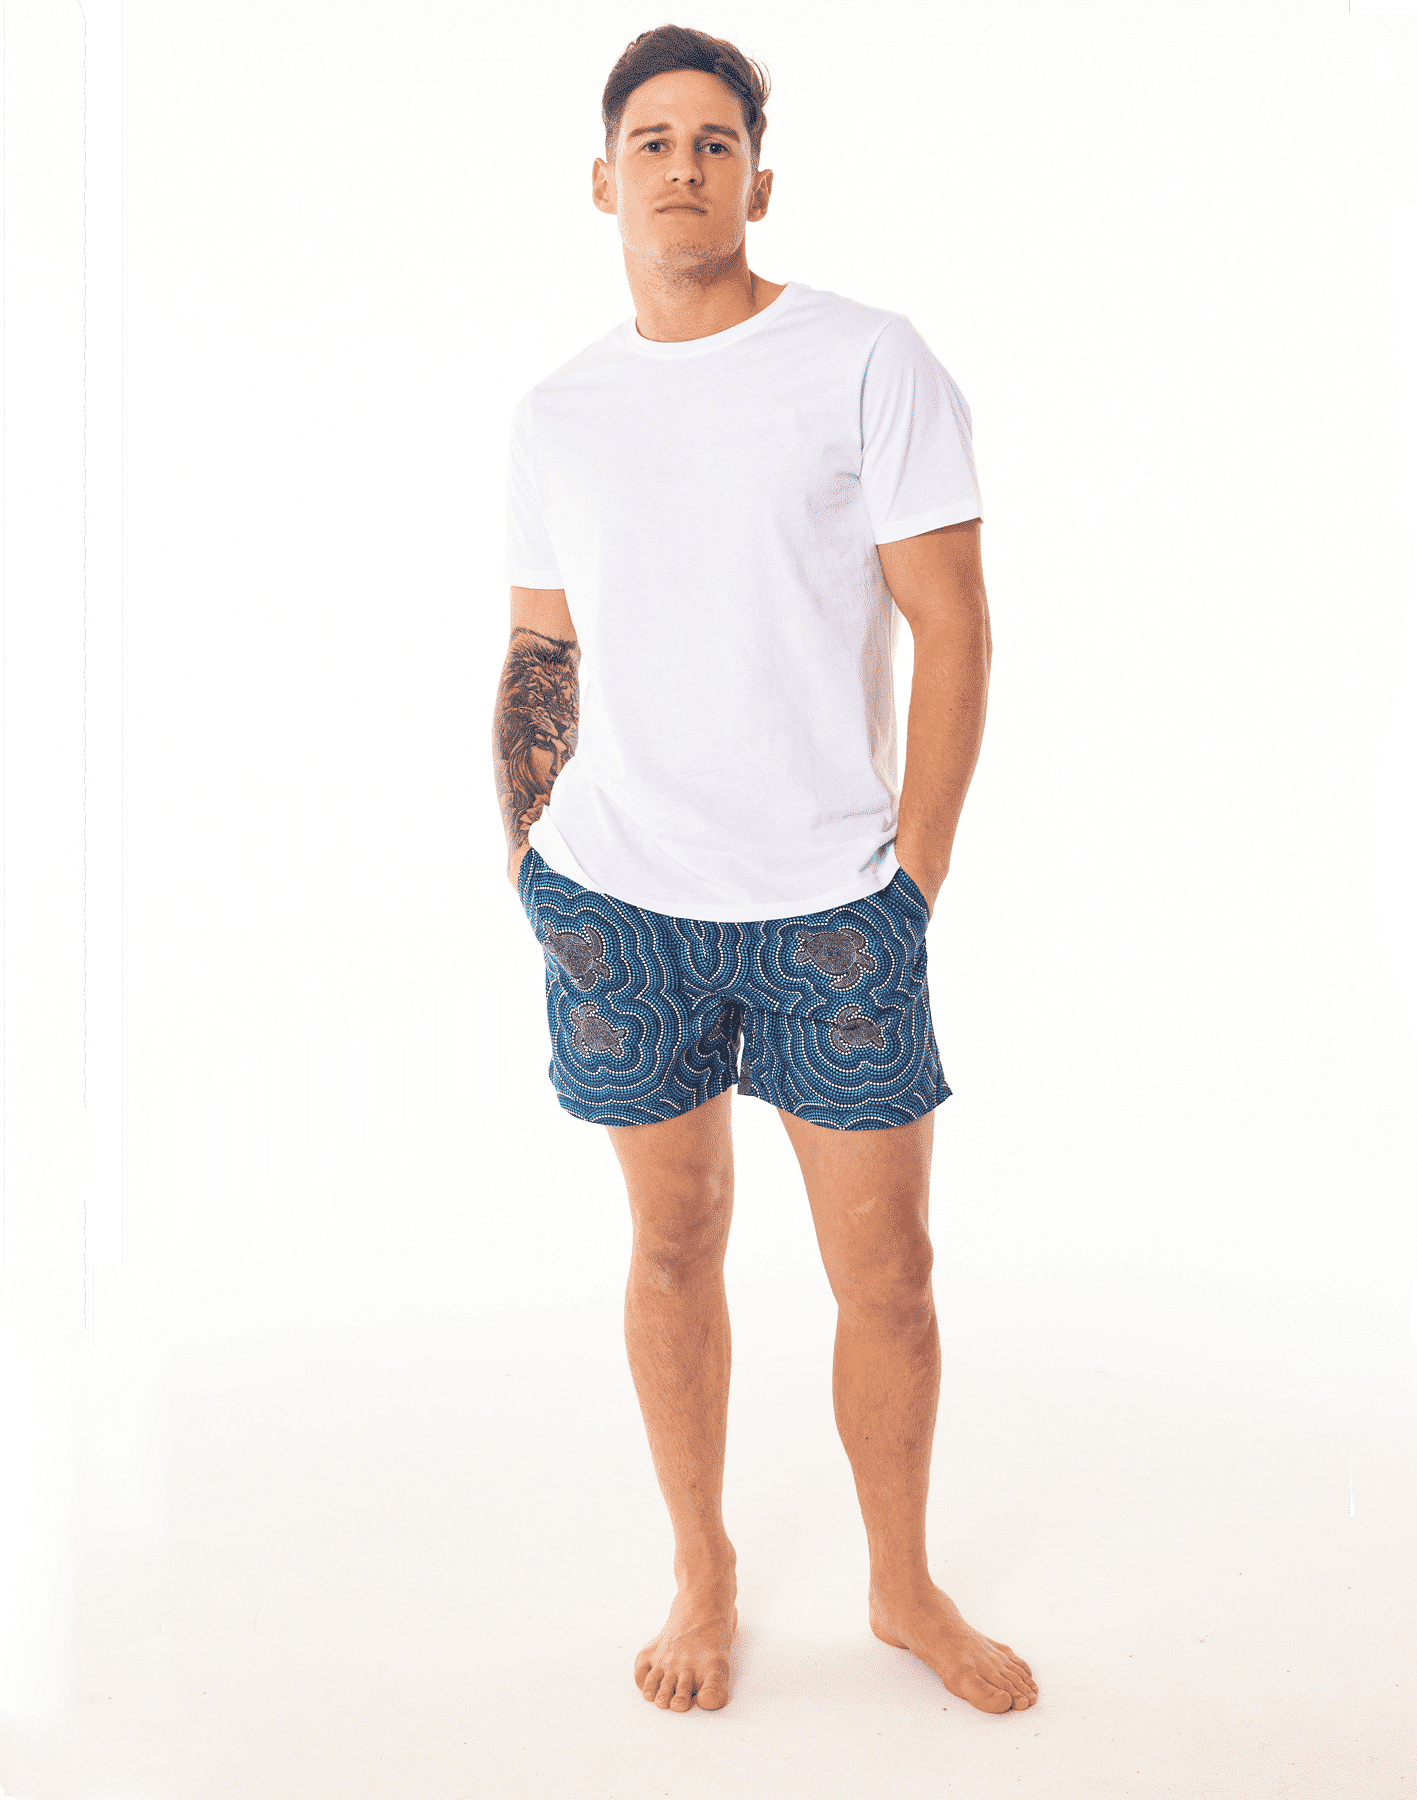 Eco-Friendly Dot art turtle Print Mens' Shorts by SevenC's - Front view on model with White T-shirt